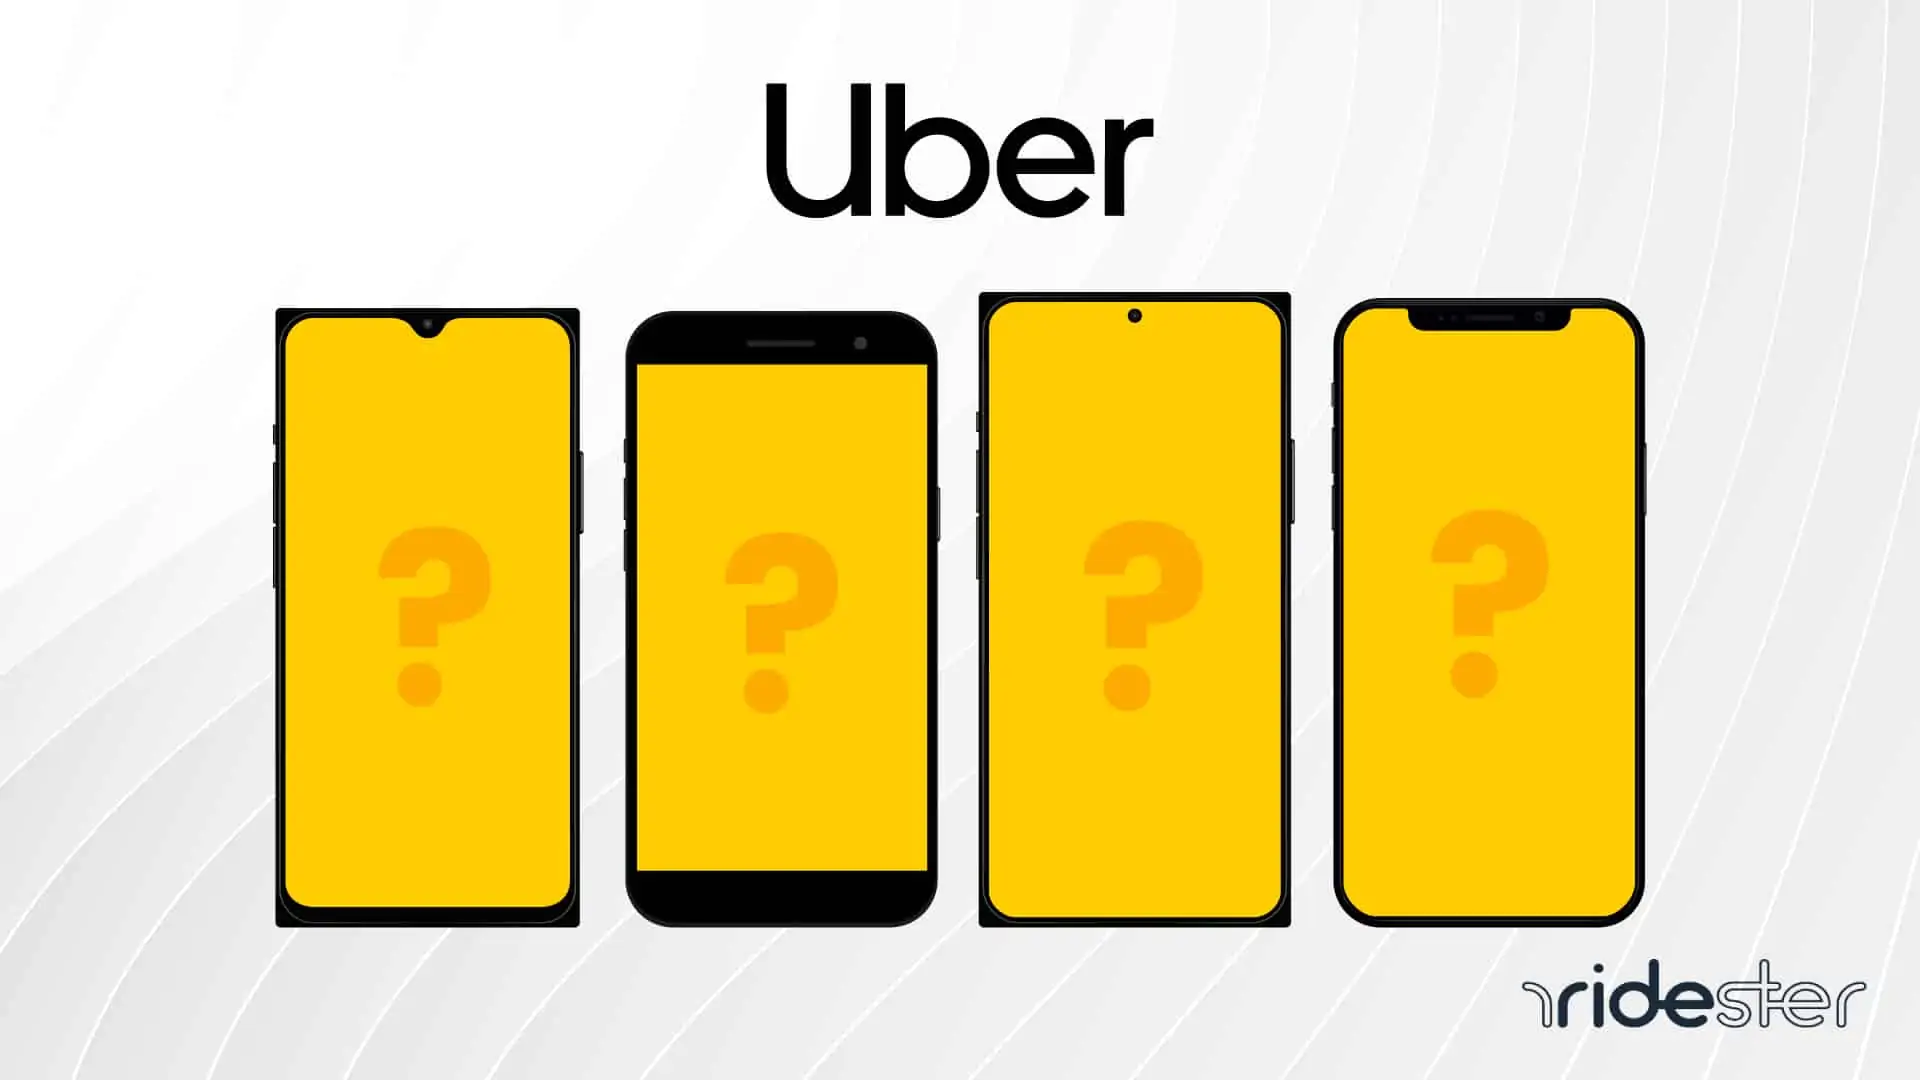 vector graphic showing different phone models to demonstrate the best phones for uber drivers